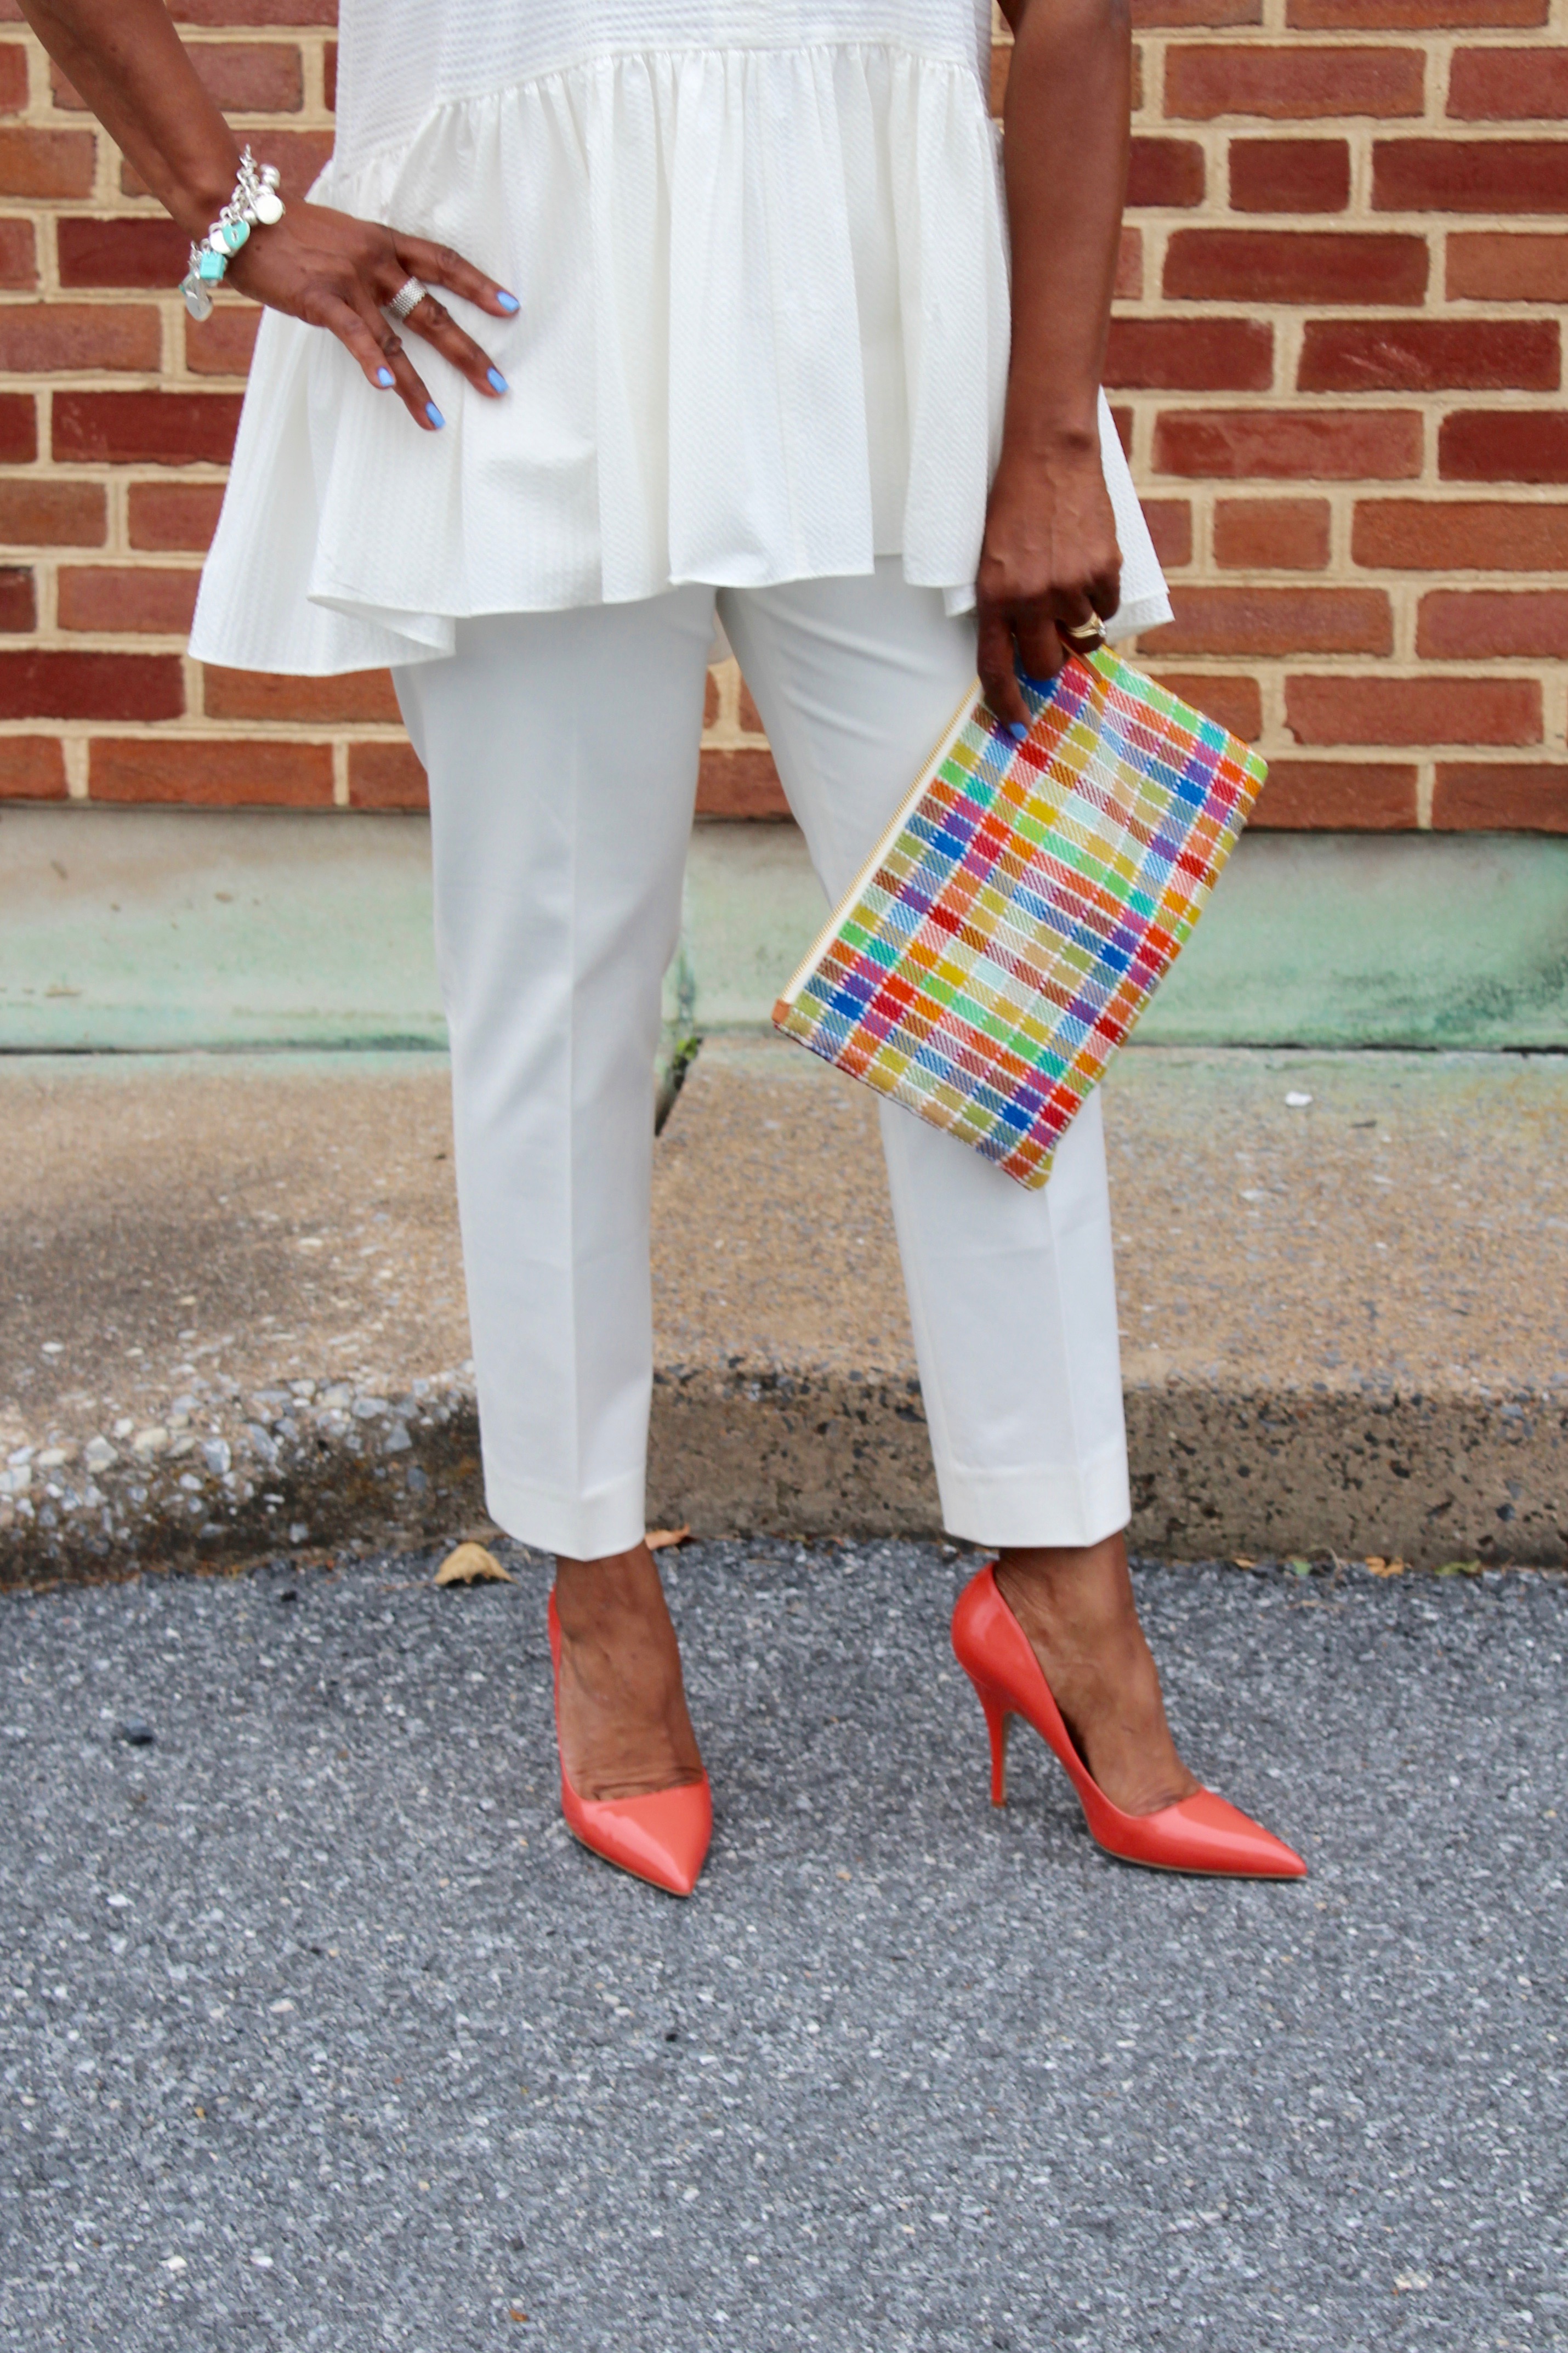 Wearing: Tibi Seersucker Cotton Peplum White Top, J. Crew Marnie White Pants, Kate SPade New York "Licorice Too" Pop Coral Patent Heels, Clare V Madras Plaid Pouch from Anthropologie and J. Crew Factory necklace.